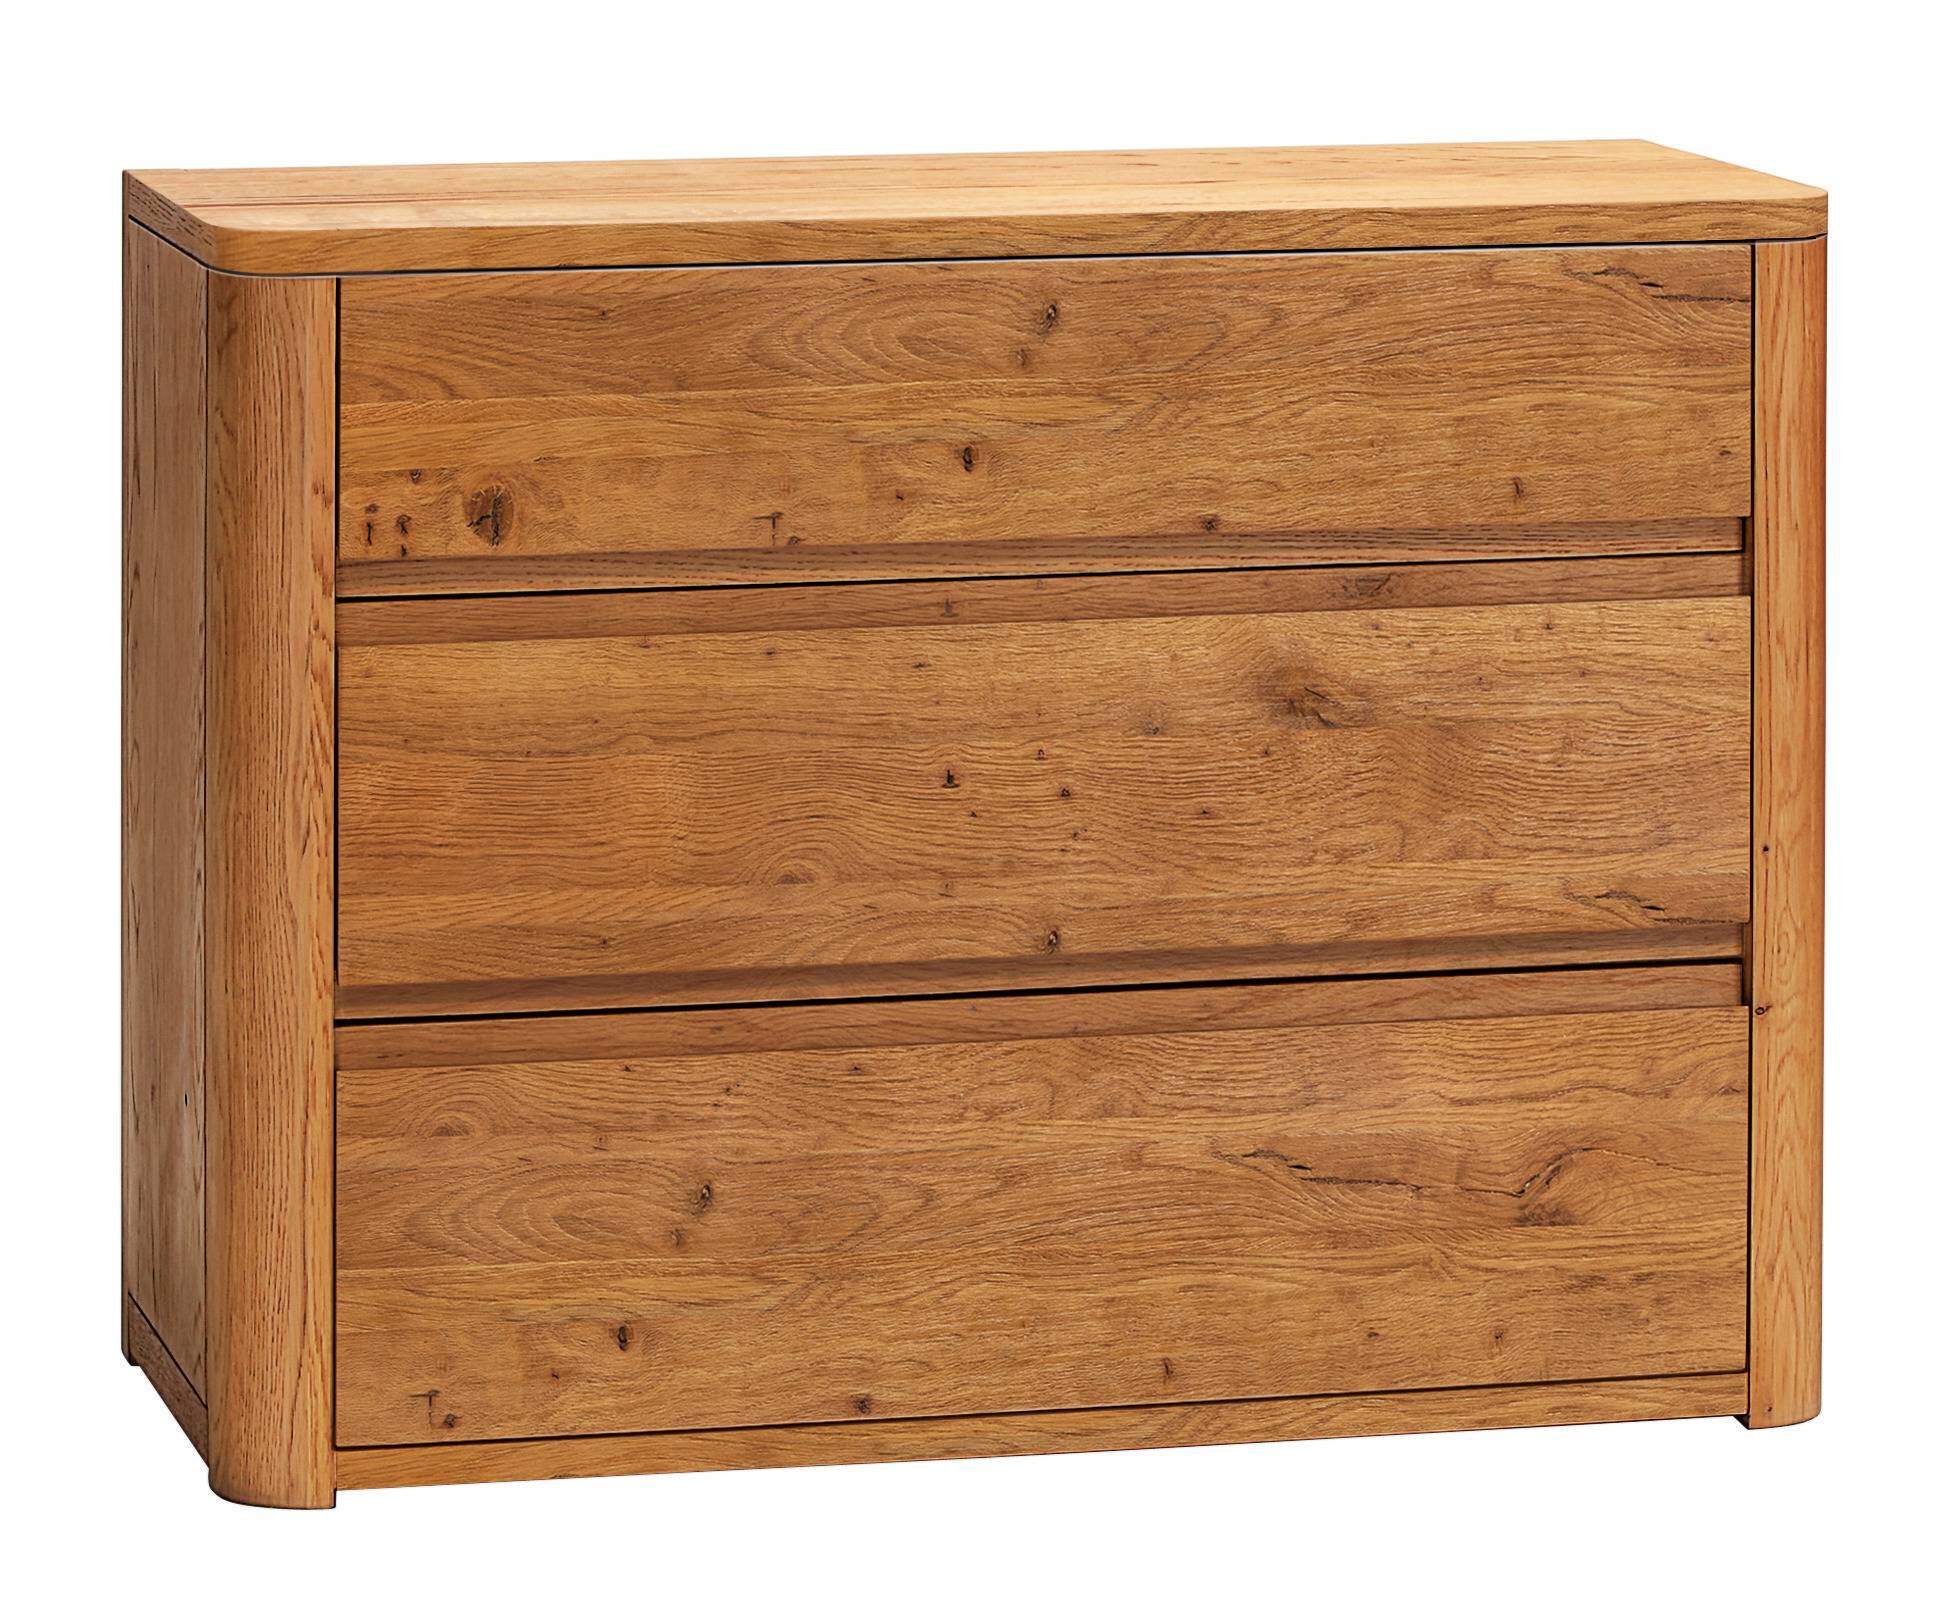 Aida chest of drawers